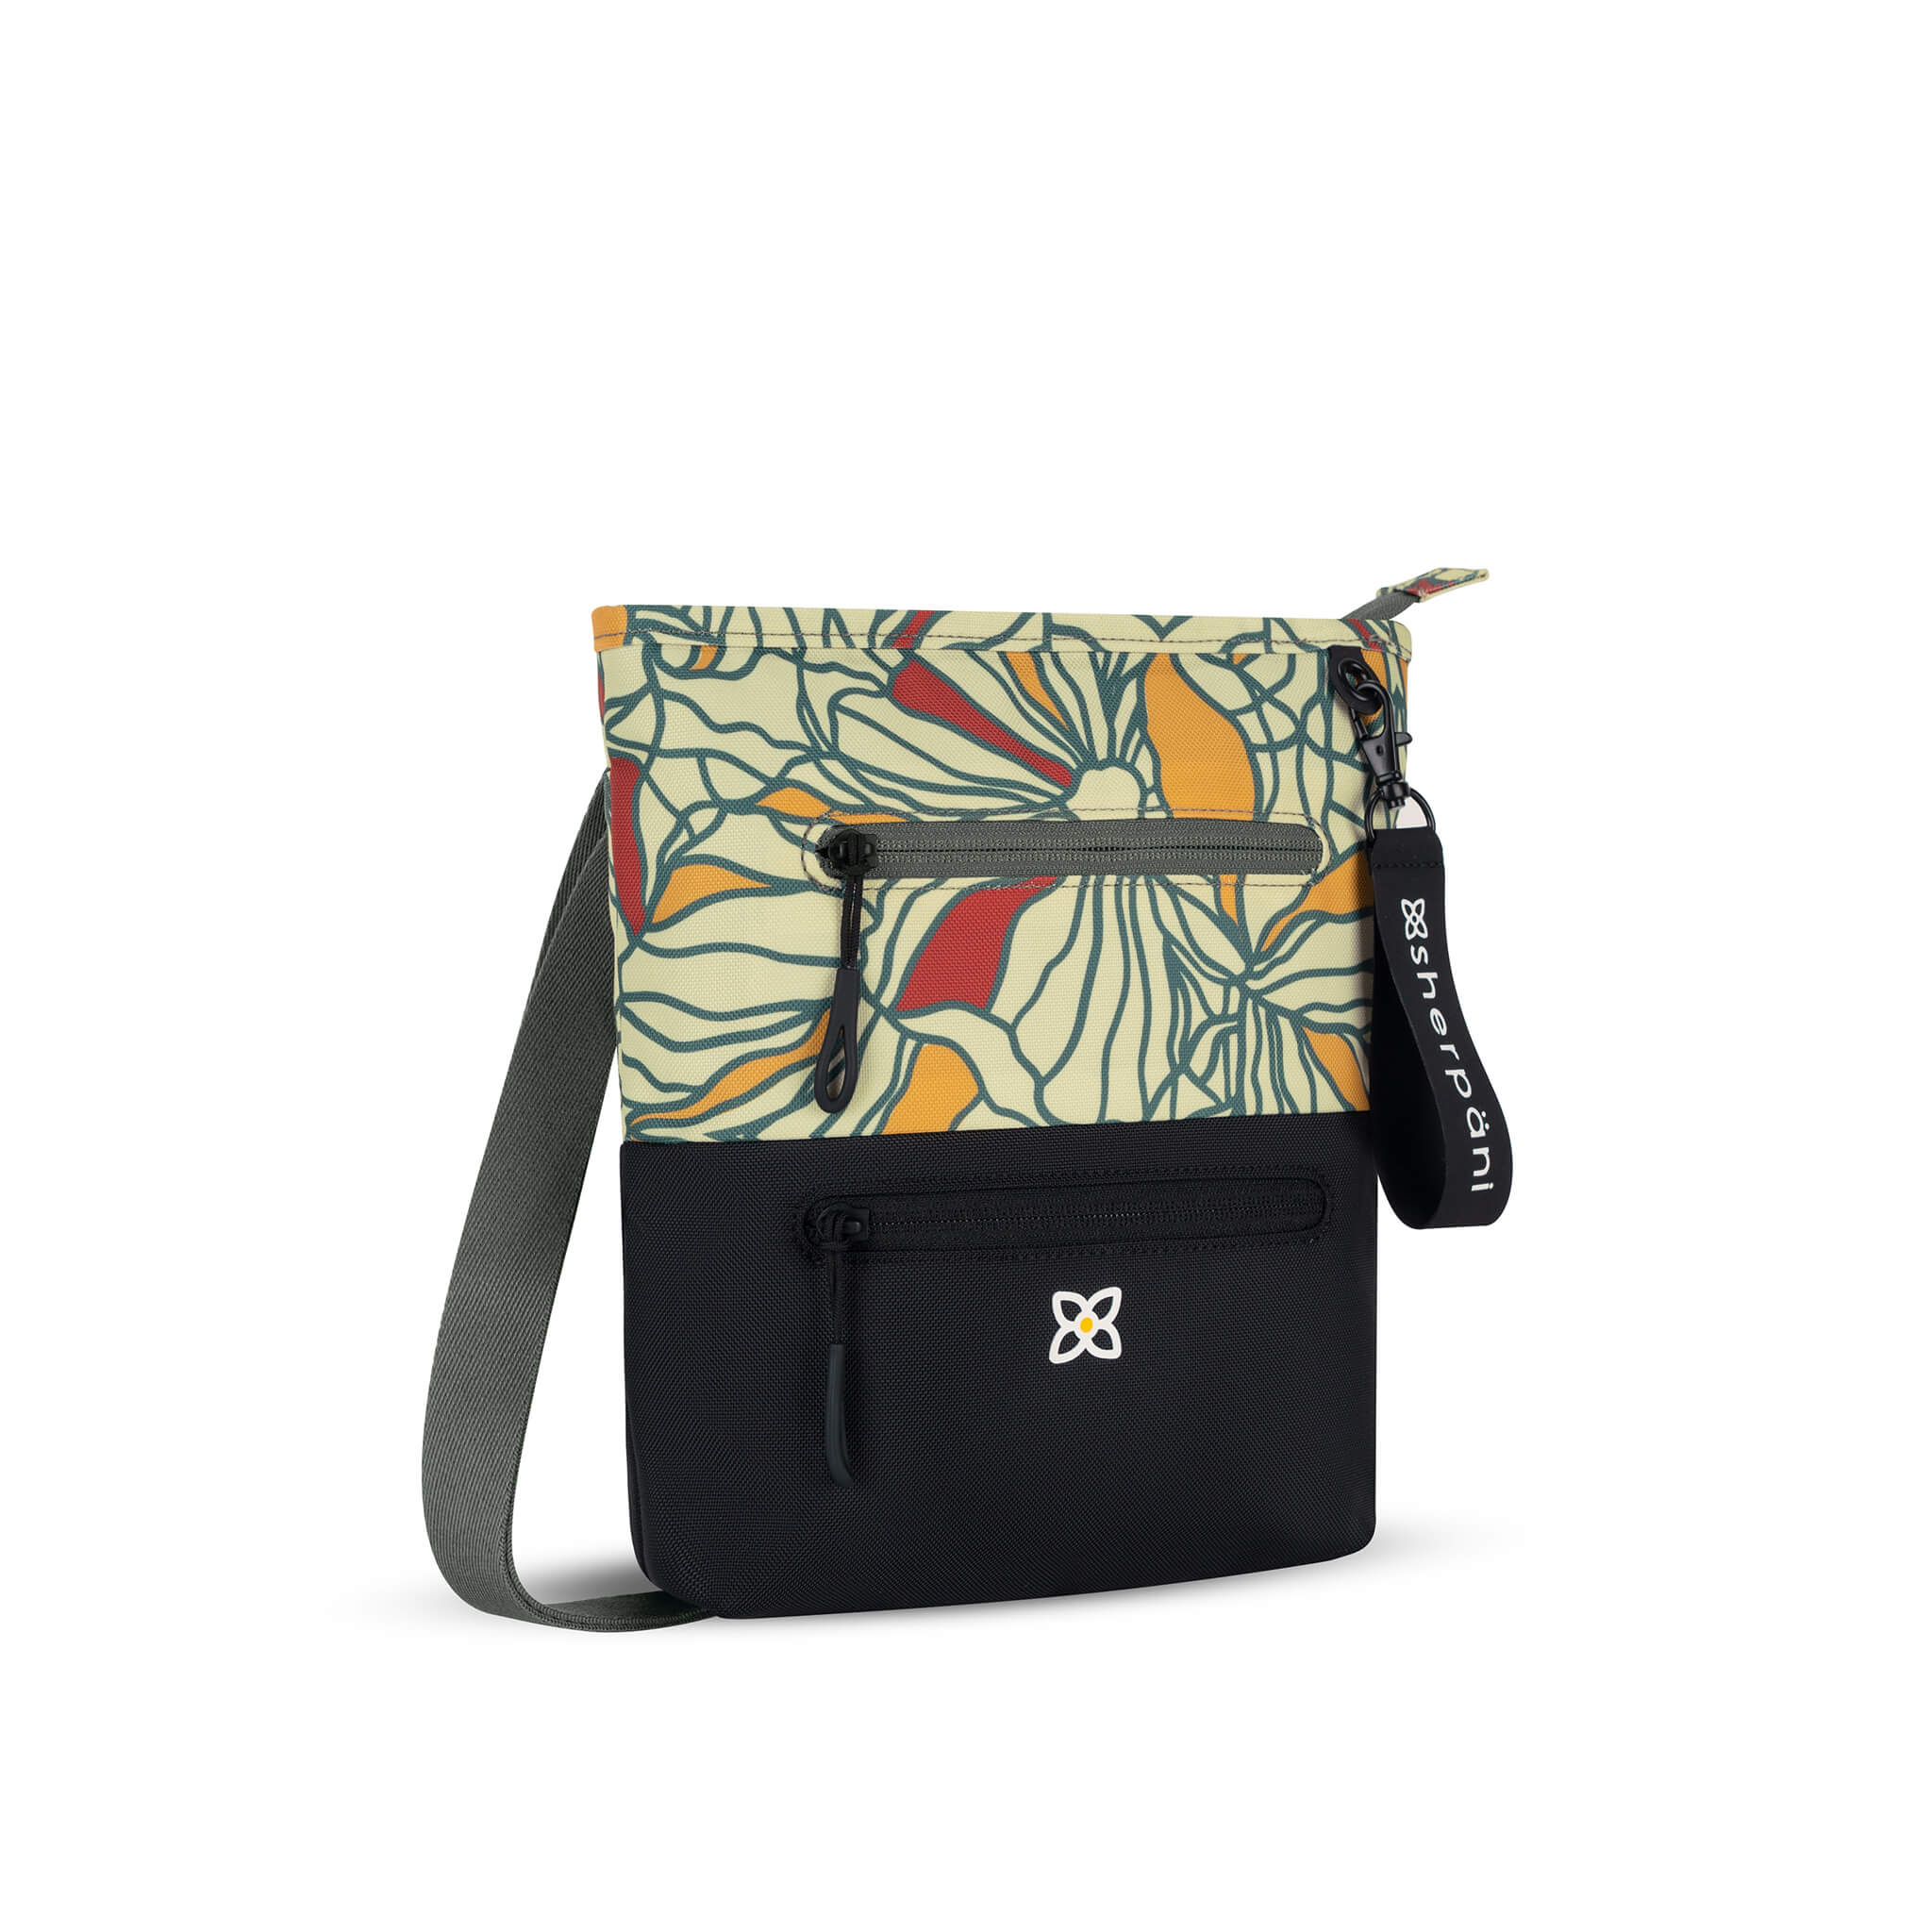 Angled front view of Sherpani crossbody travel bag, the Sadie in Fiori. Sadie features include two front zipper pockets, a discrete side pocket, detachable keychain, adjustable crossbody strap, back slip pocket and RFID blocking technology. The Fiori colorway is two-toned in black and a floral pattern with red accents.